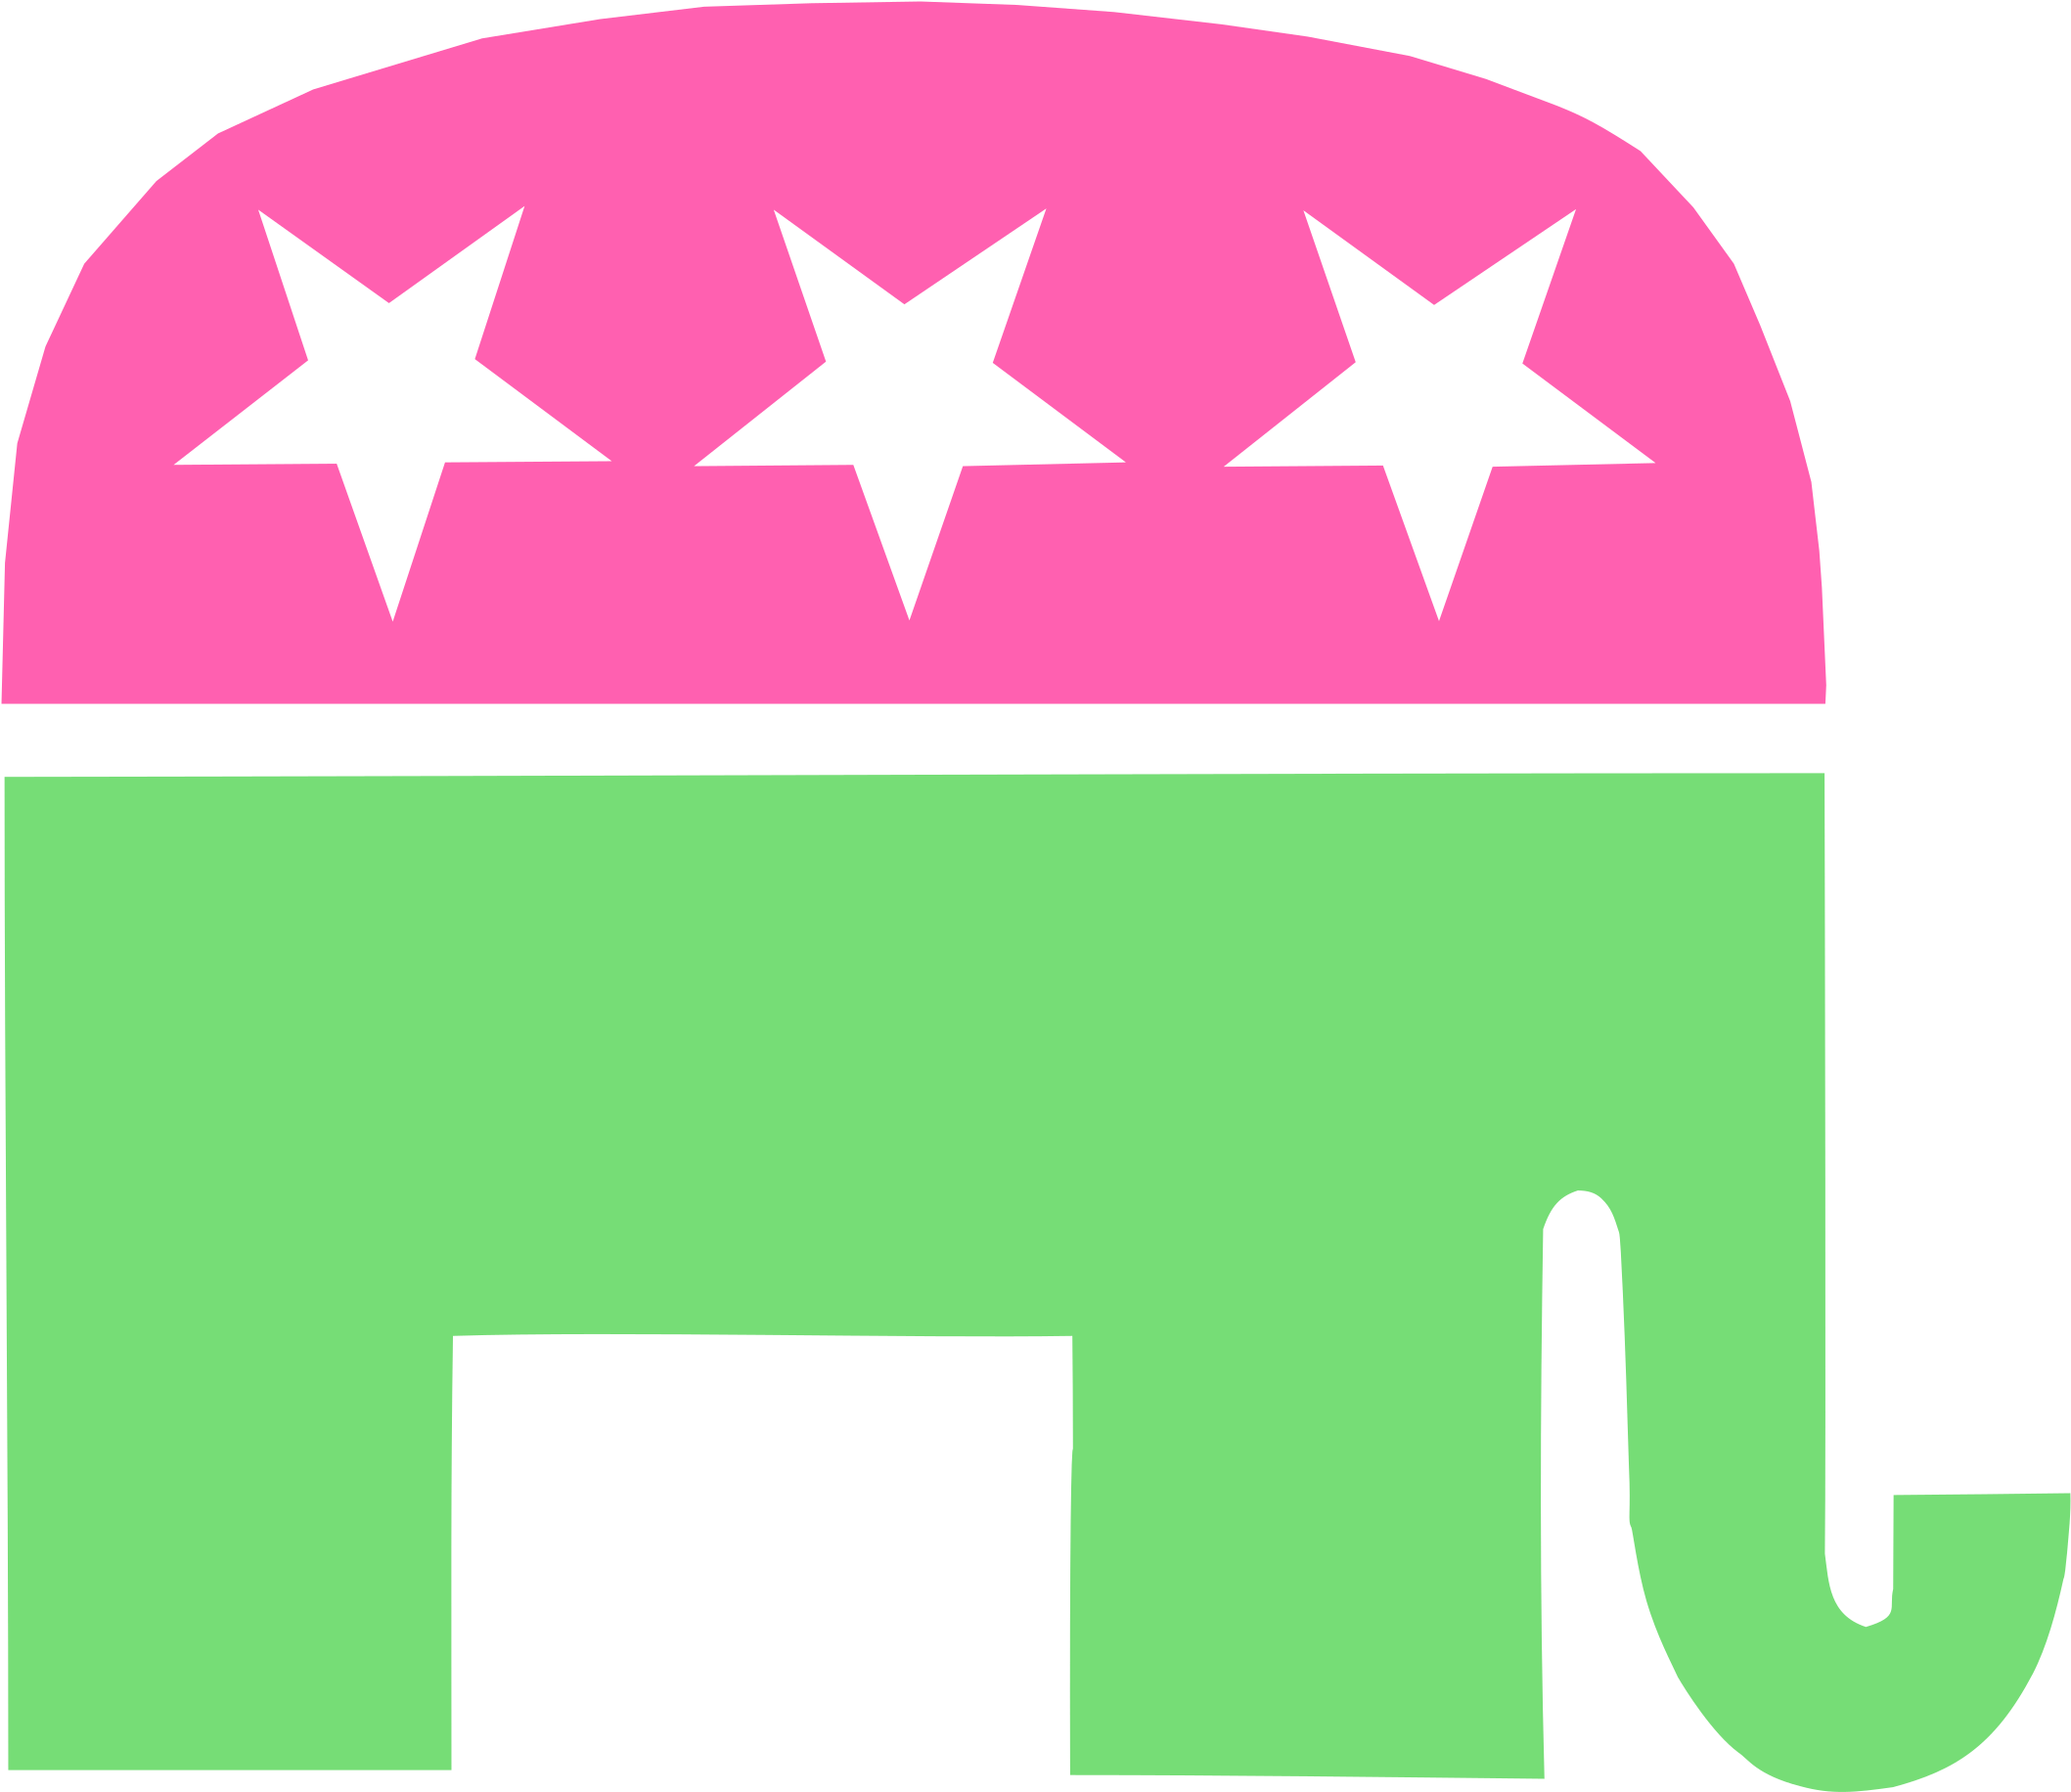 This Free Icons Png Design Of Gop Elephant